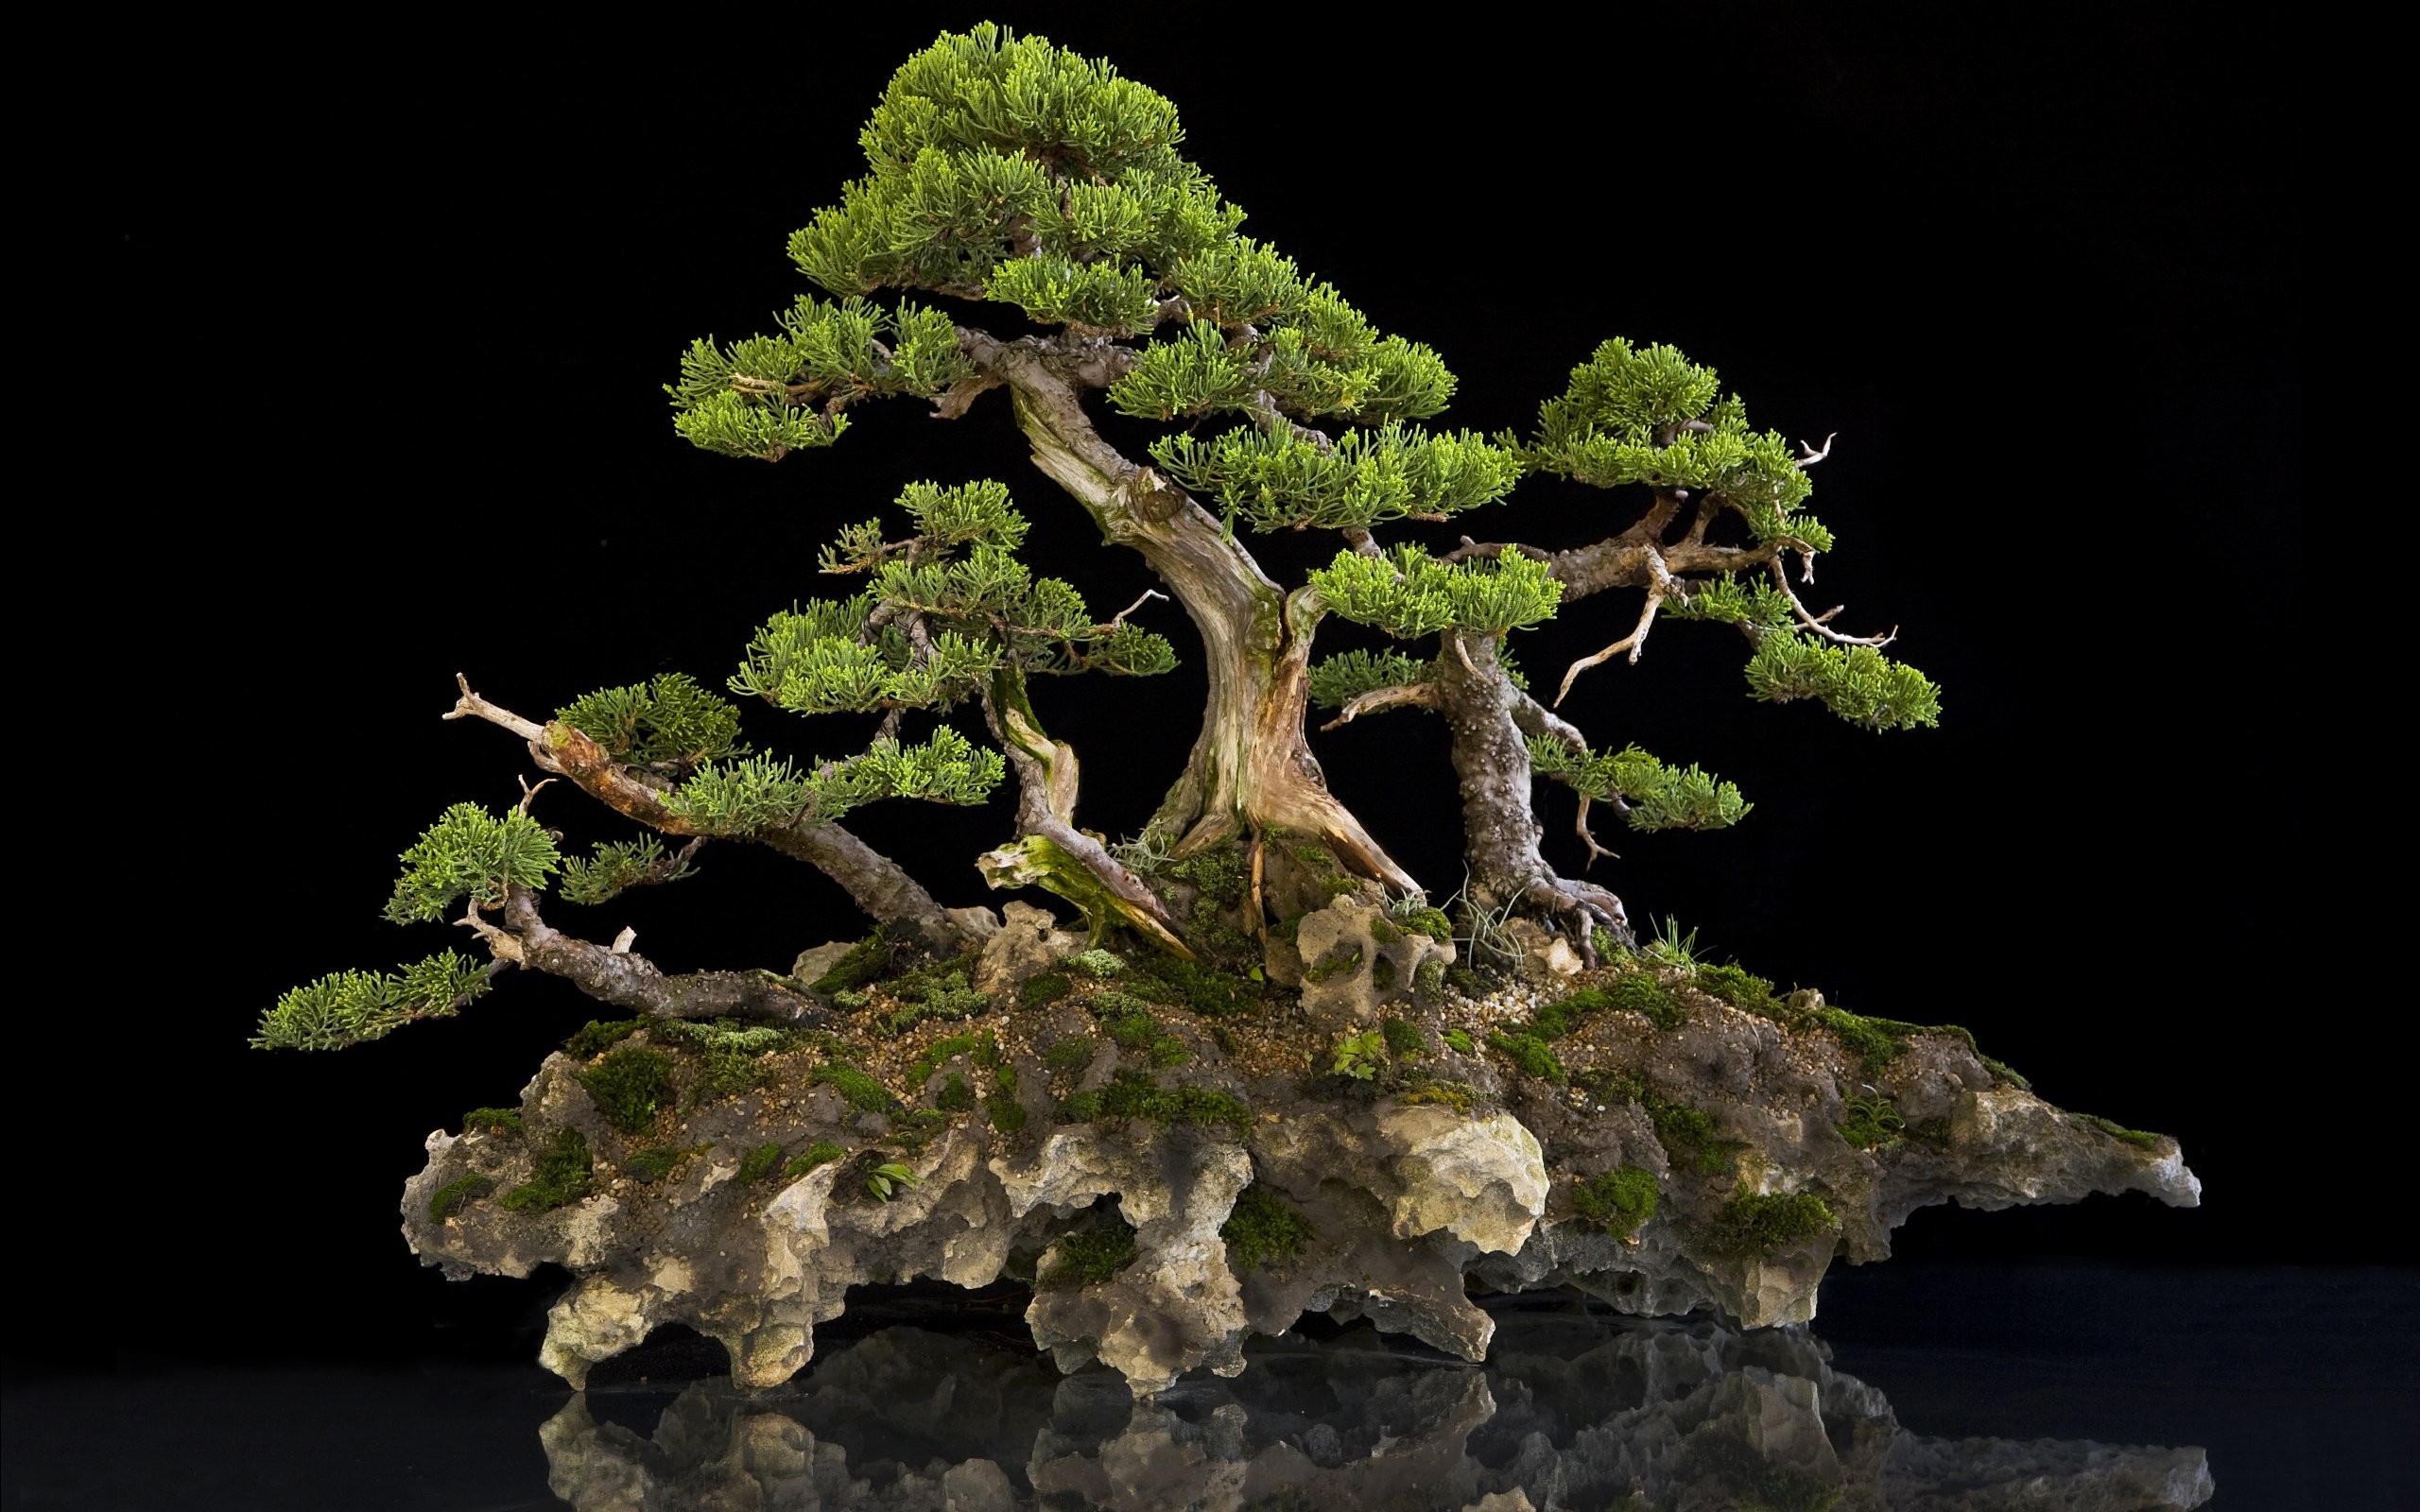 100 Bonsai Pictures  Download Free Images on Unsplash